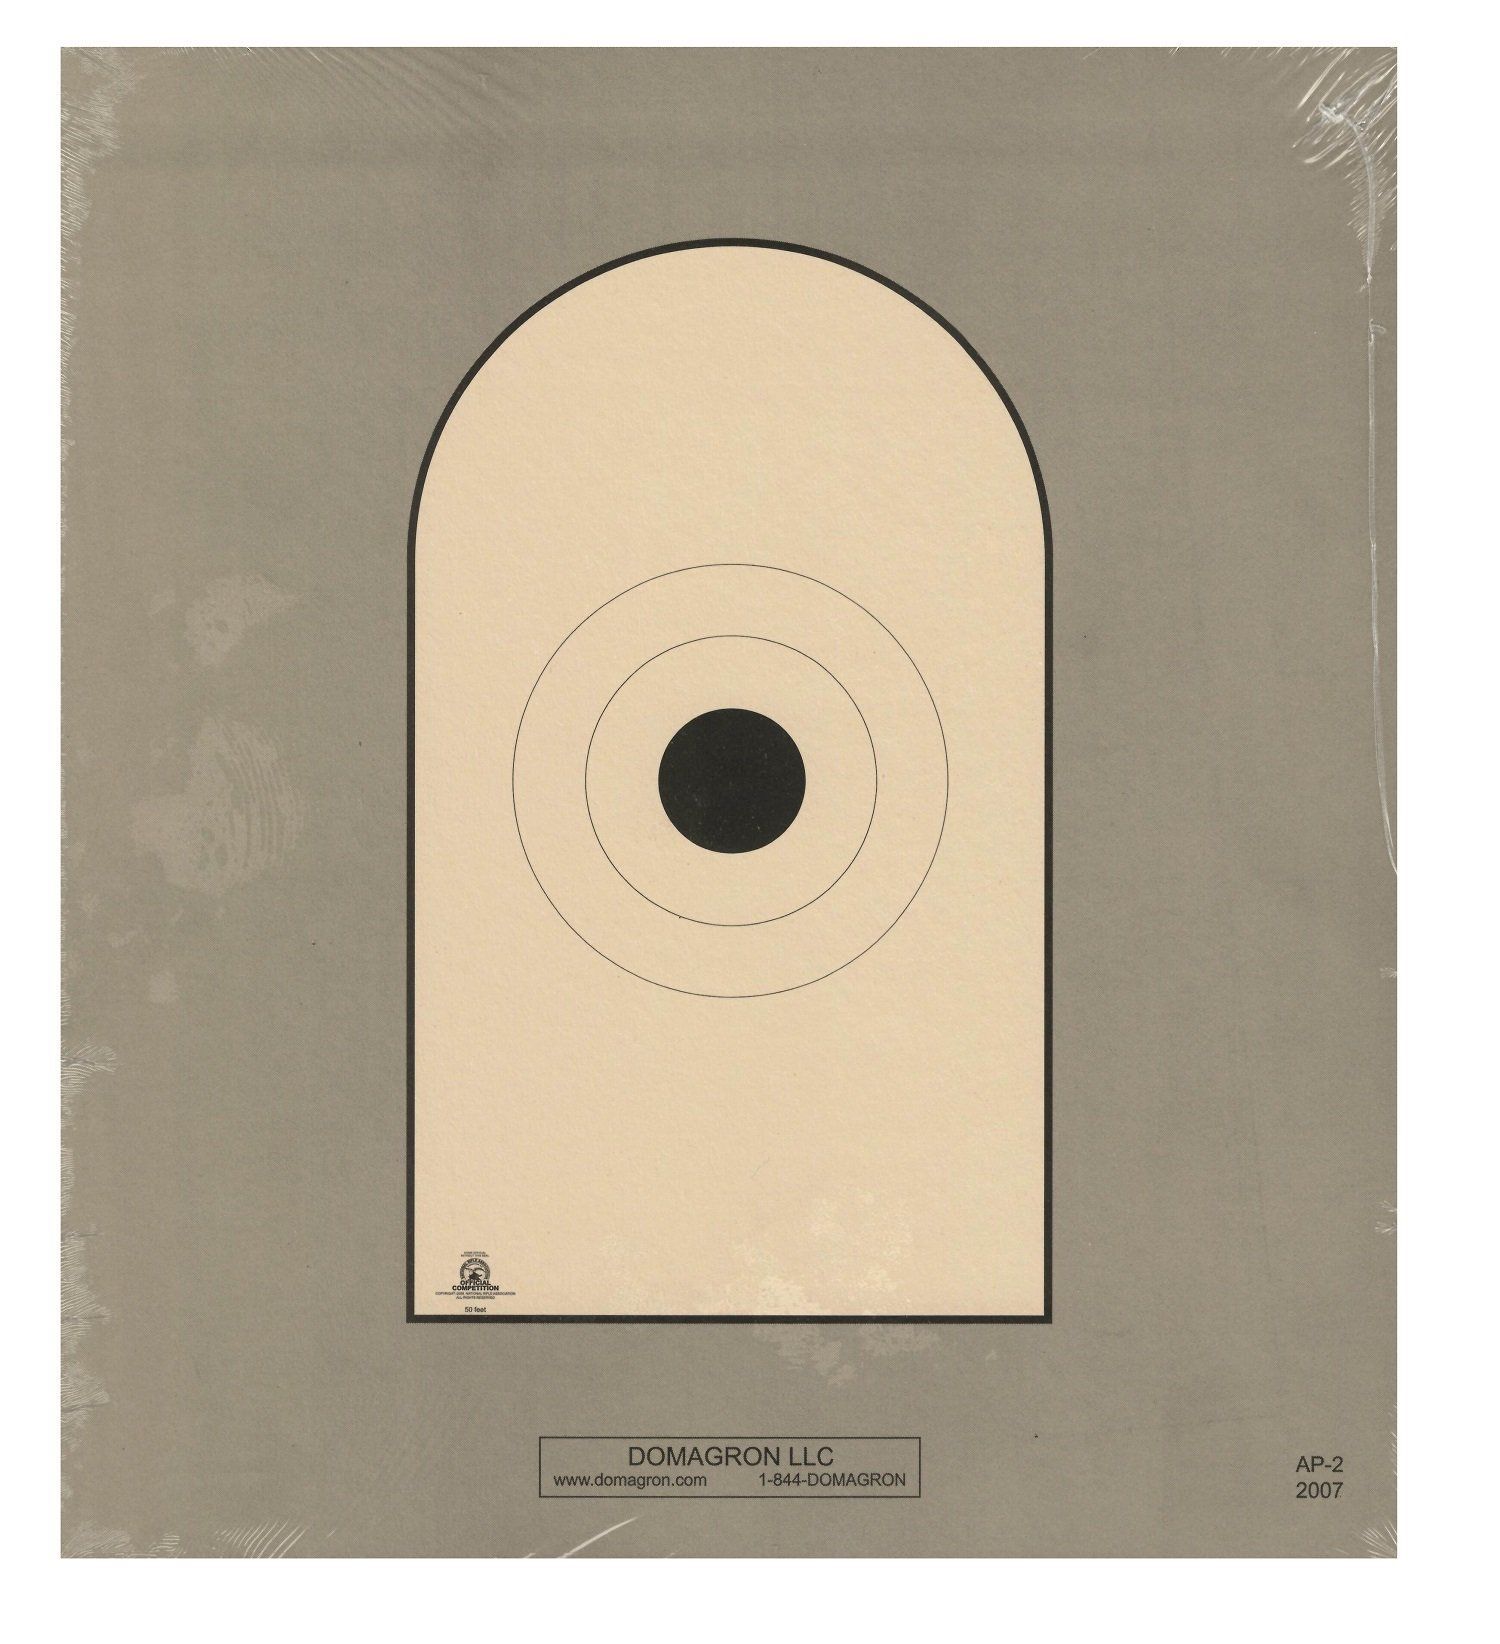 AP-2 - Bianchi Cup Black Center Official 50 Foot Reduction NRA Target of AP-1 Target (pack of 100)